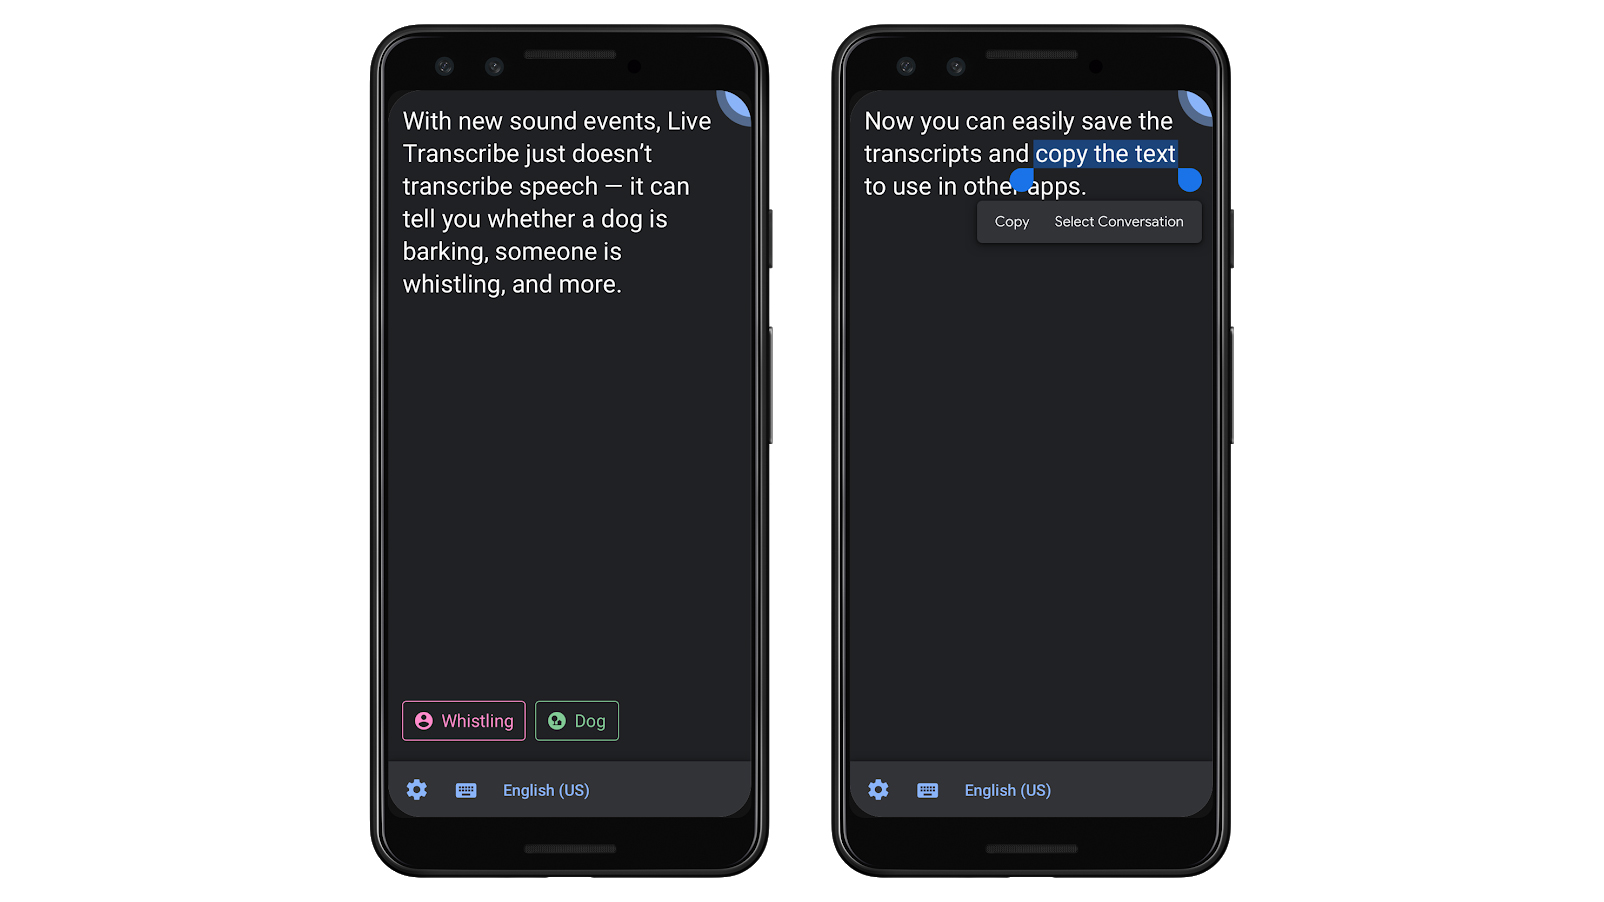 An official image of a new Live Transcribe feature which transcribes non-conversation sounds, like whistling and dogs barking.